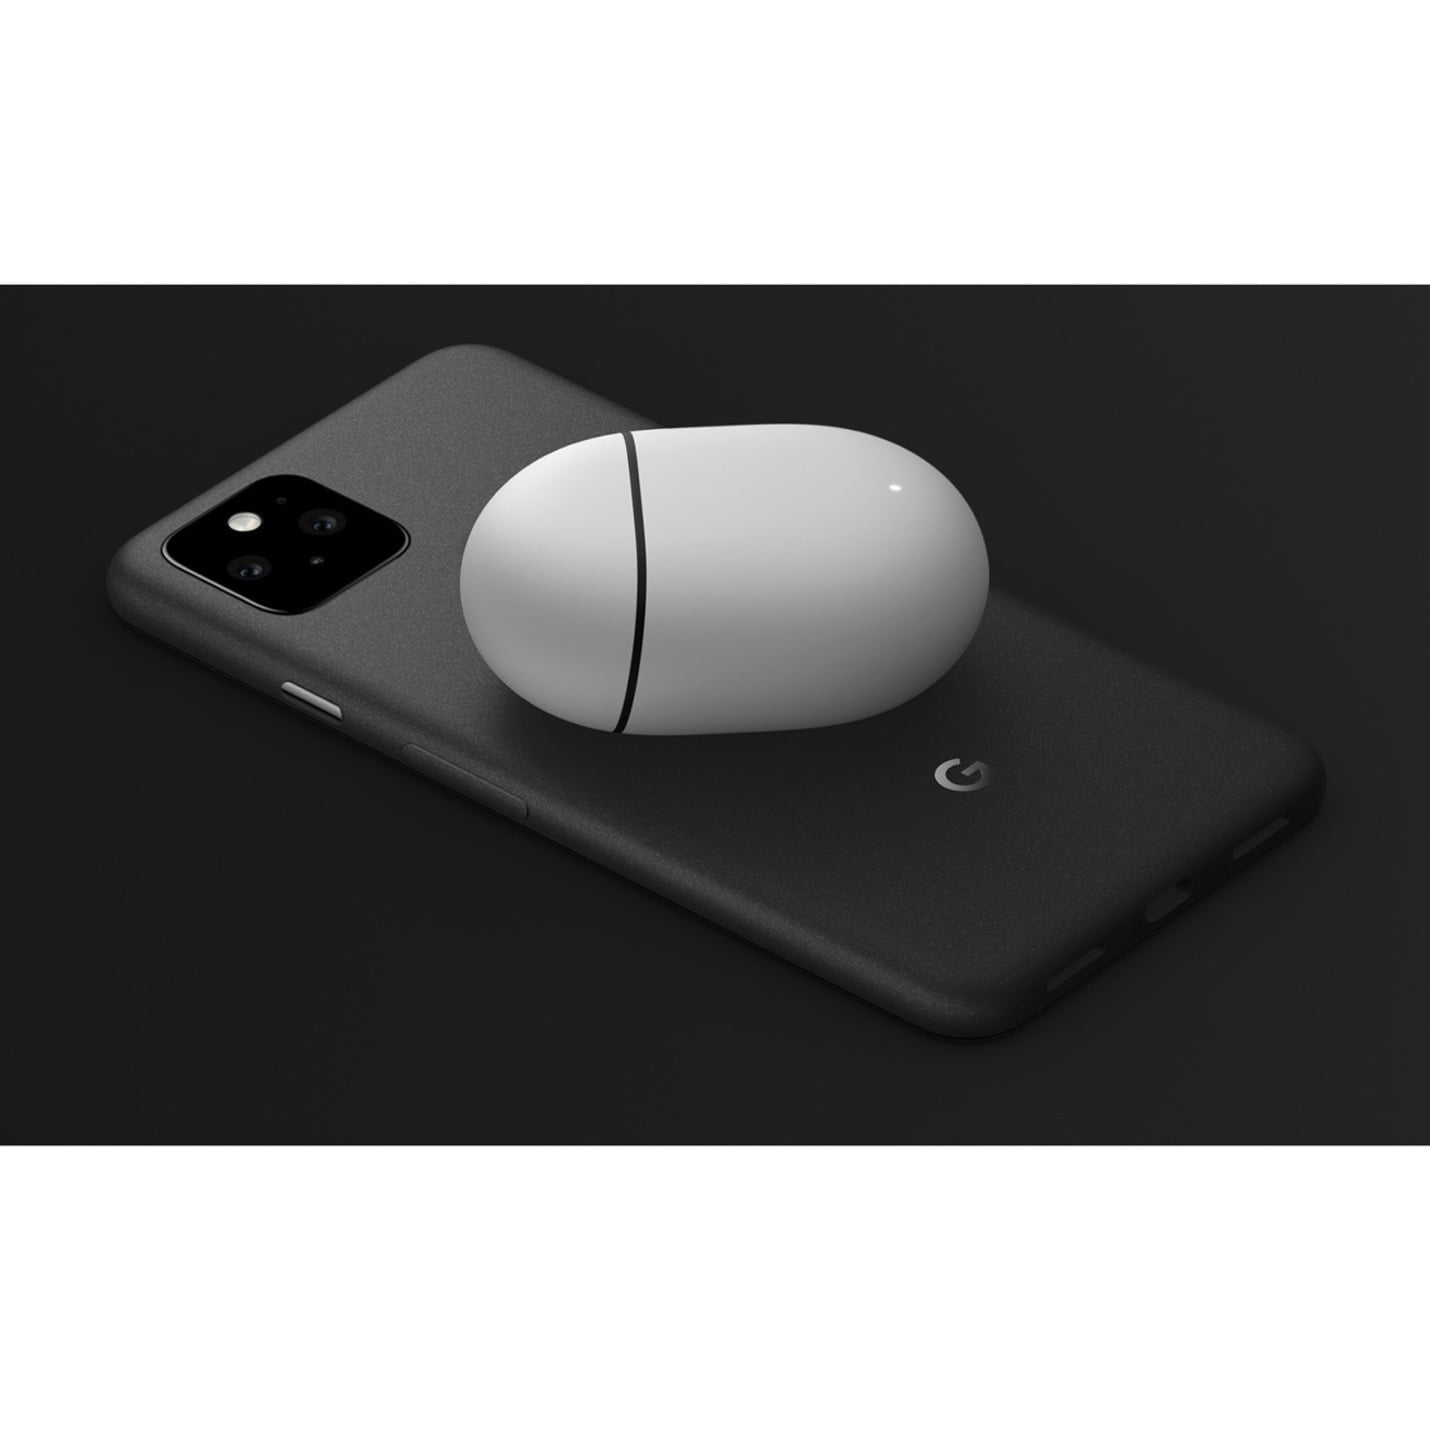 Google Pixel 5 - 5G Android Phone - Water Resistant - Unlocked Smartphone  with Night Sight and Ultrawide Lens - Just Black - Walmart.com